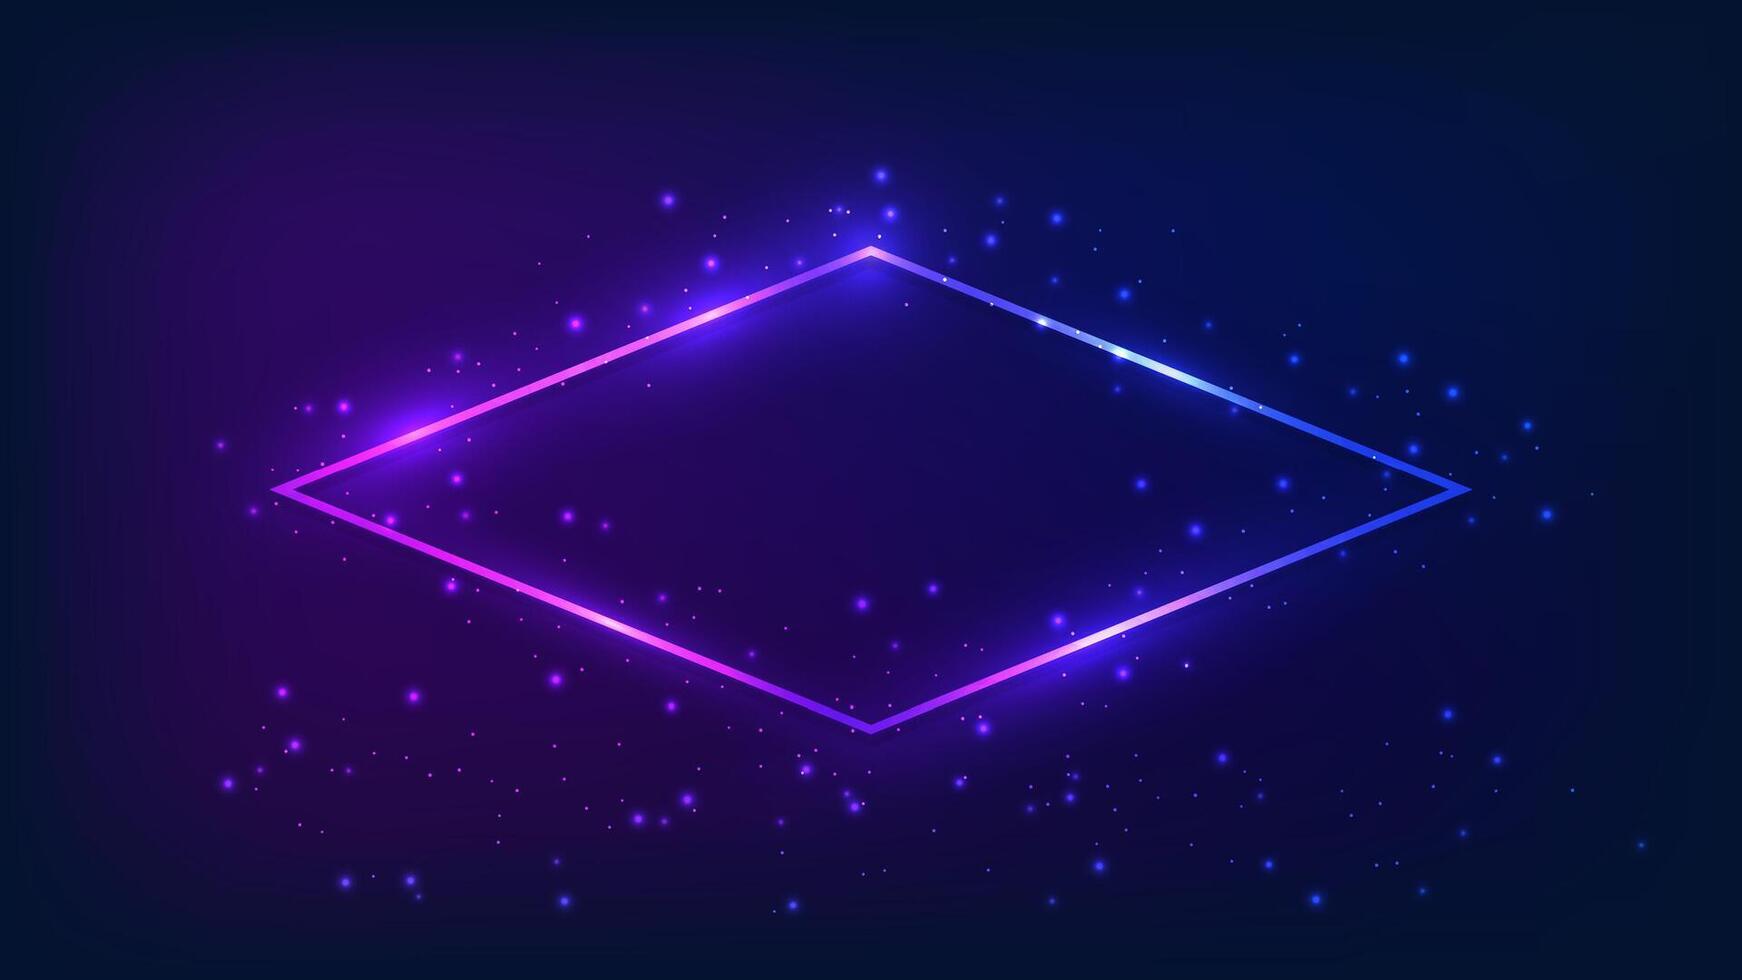 Neon rhombus frame with shining effects vector